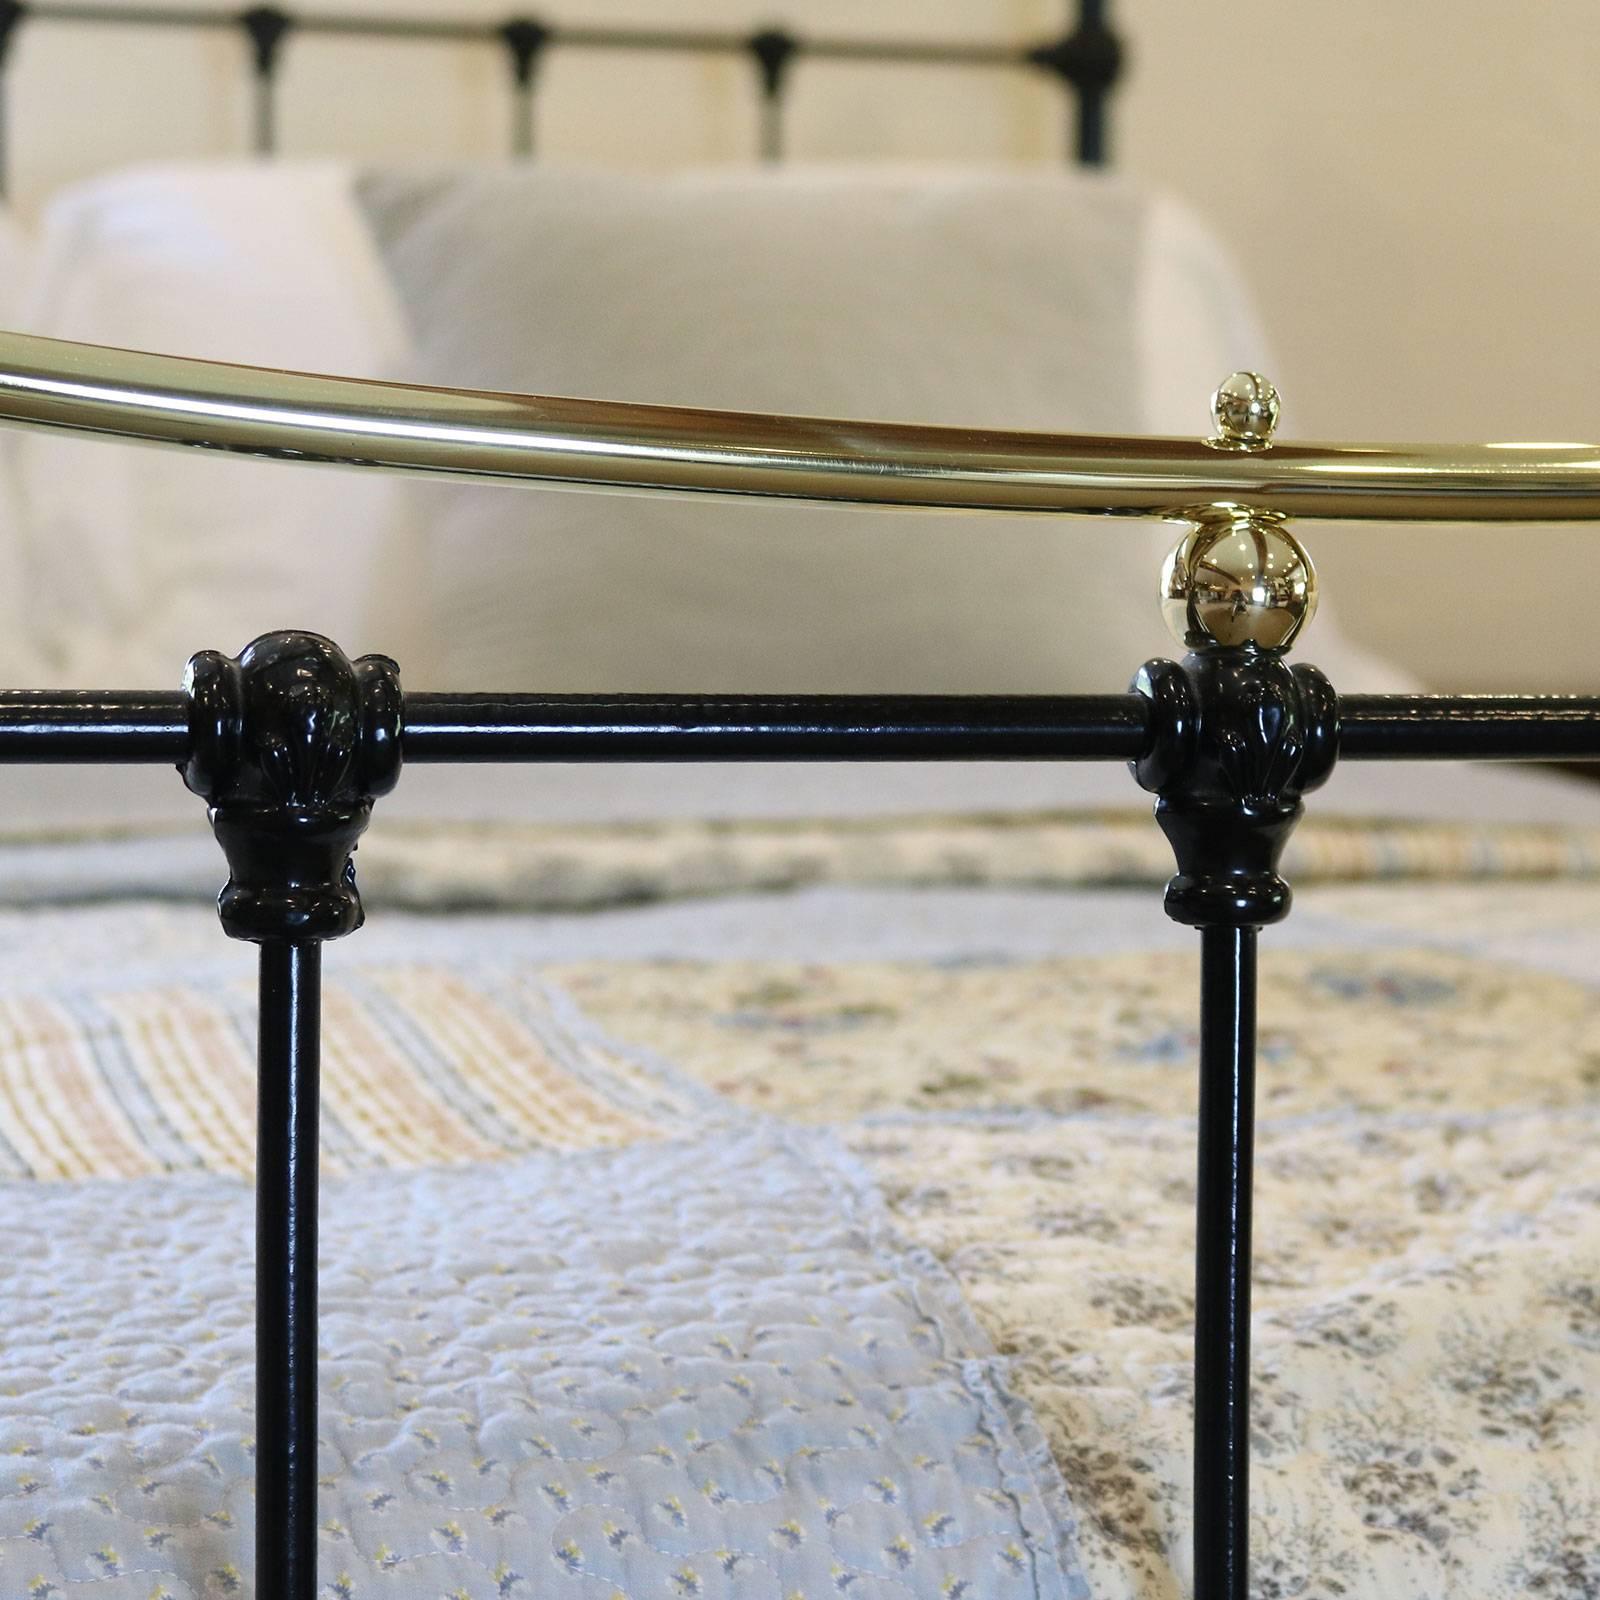 Brass and iron bed finished in black with curved brass top rails and decorative castings. This bed is totally restored and adapted from an original antique frame.

This bed accepts a British king-size or American queen-size (60 inches, 5ft or